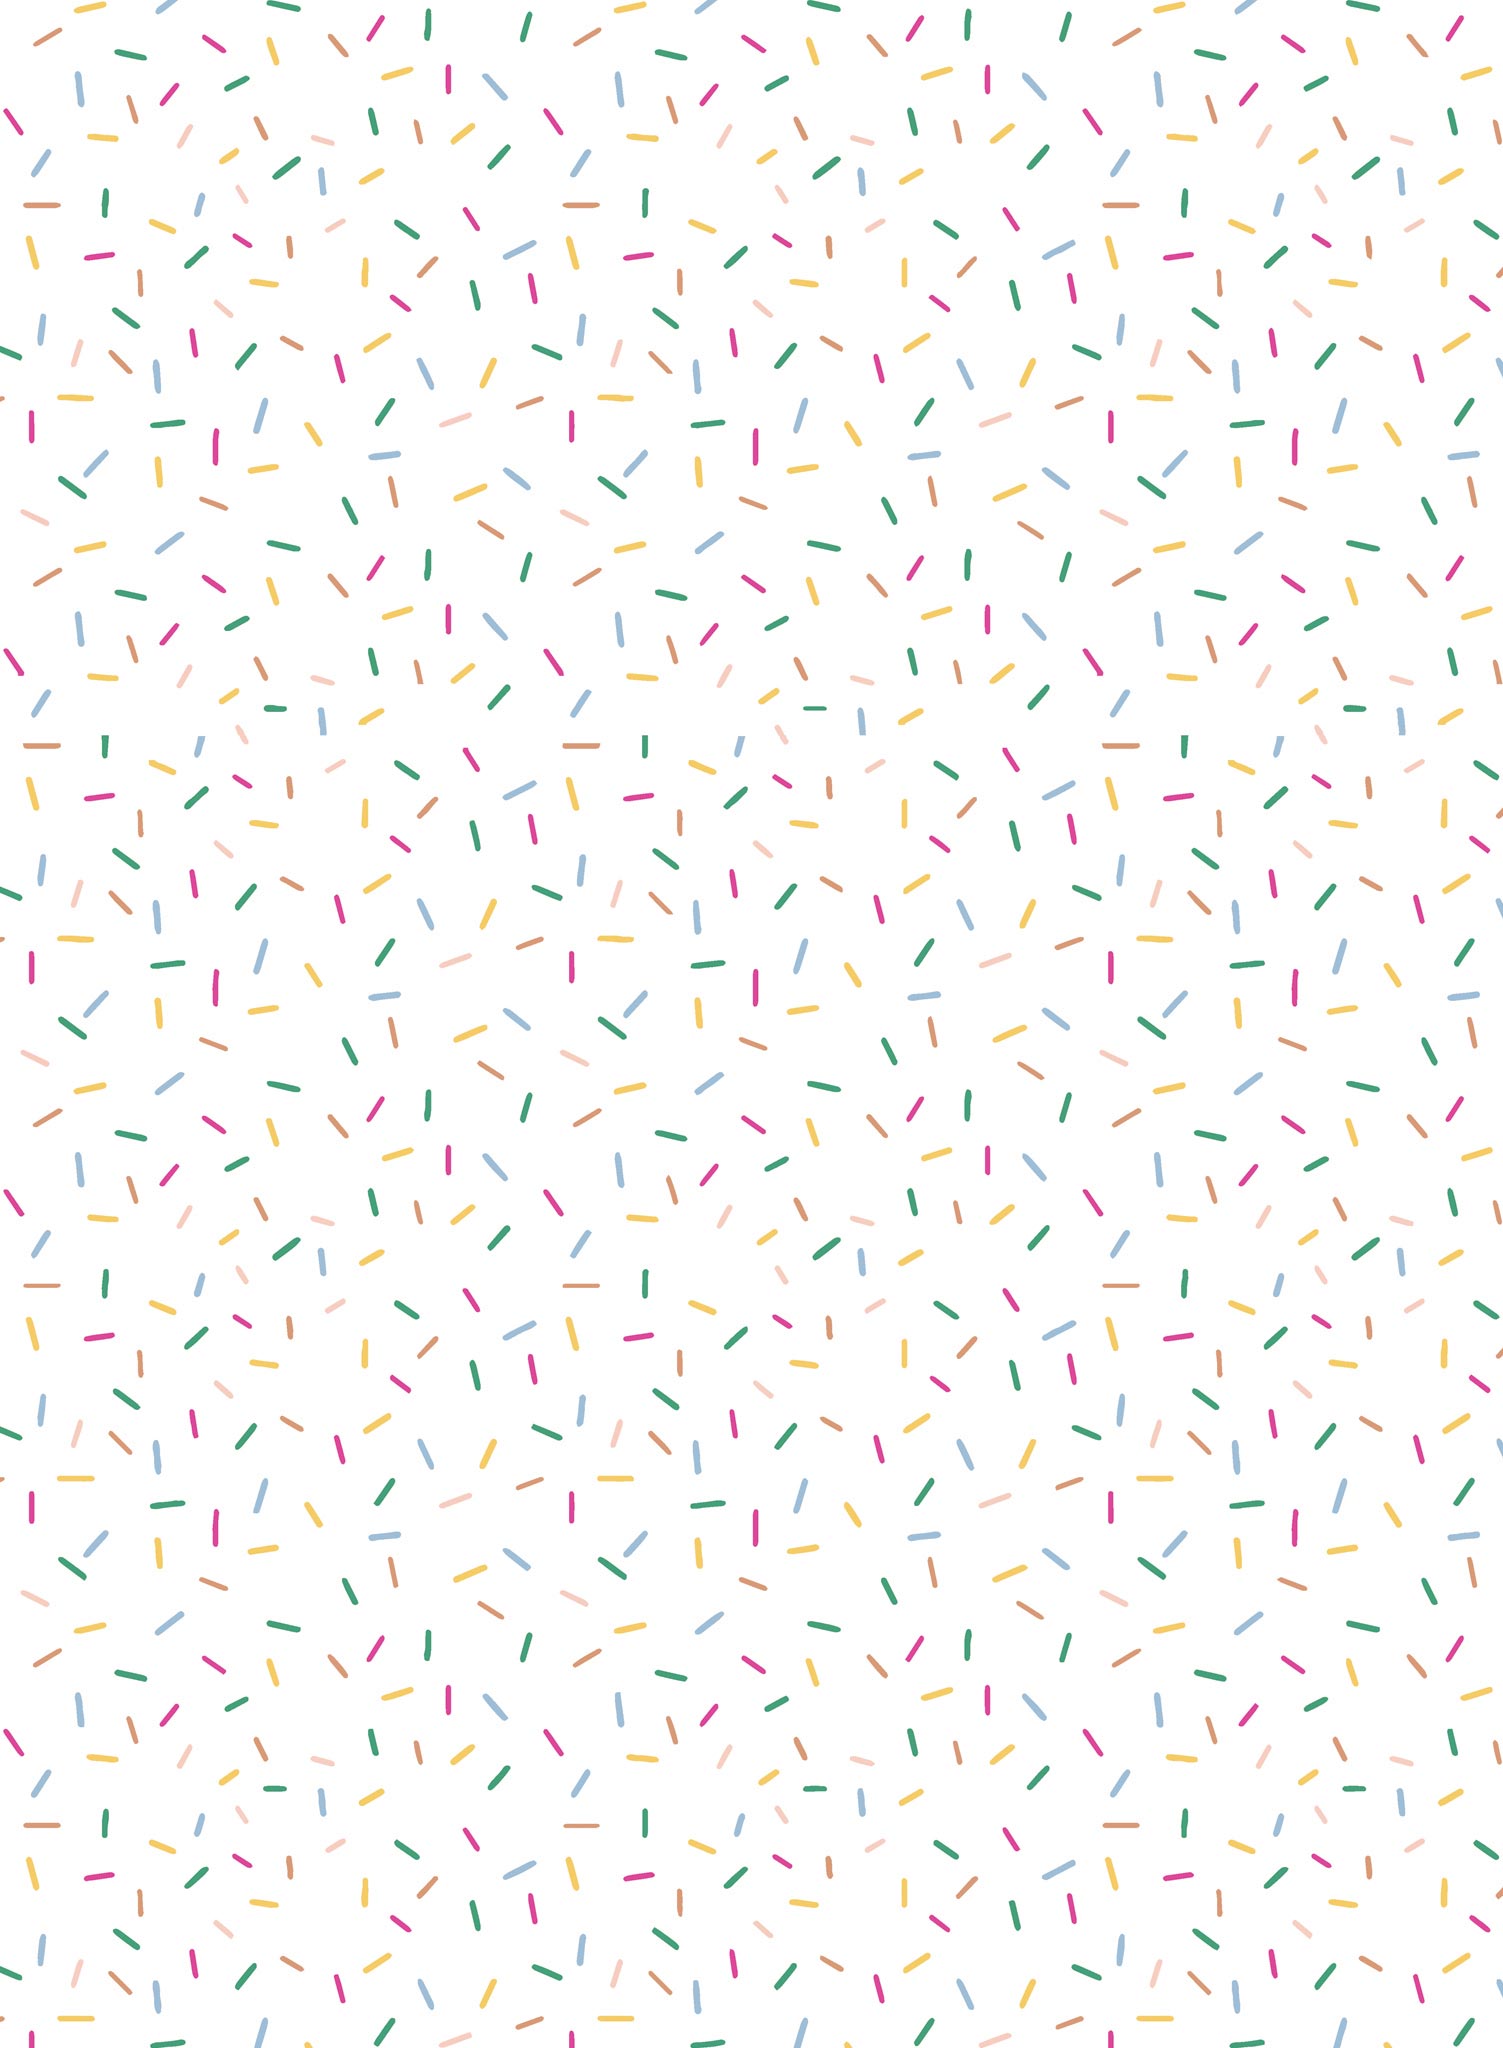 Birthday Cake is a minimalist wallpaper by Opposite Wall of a colourful straight small line floating around